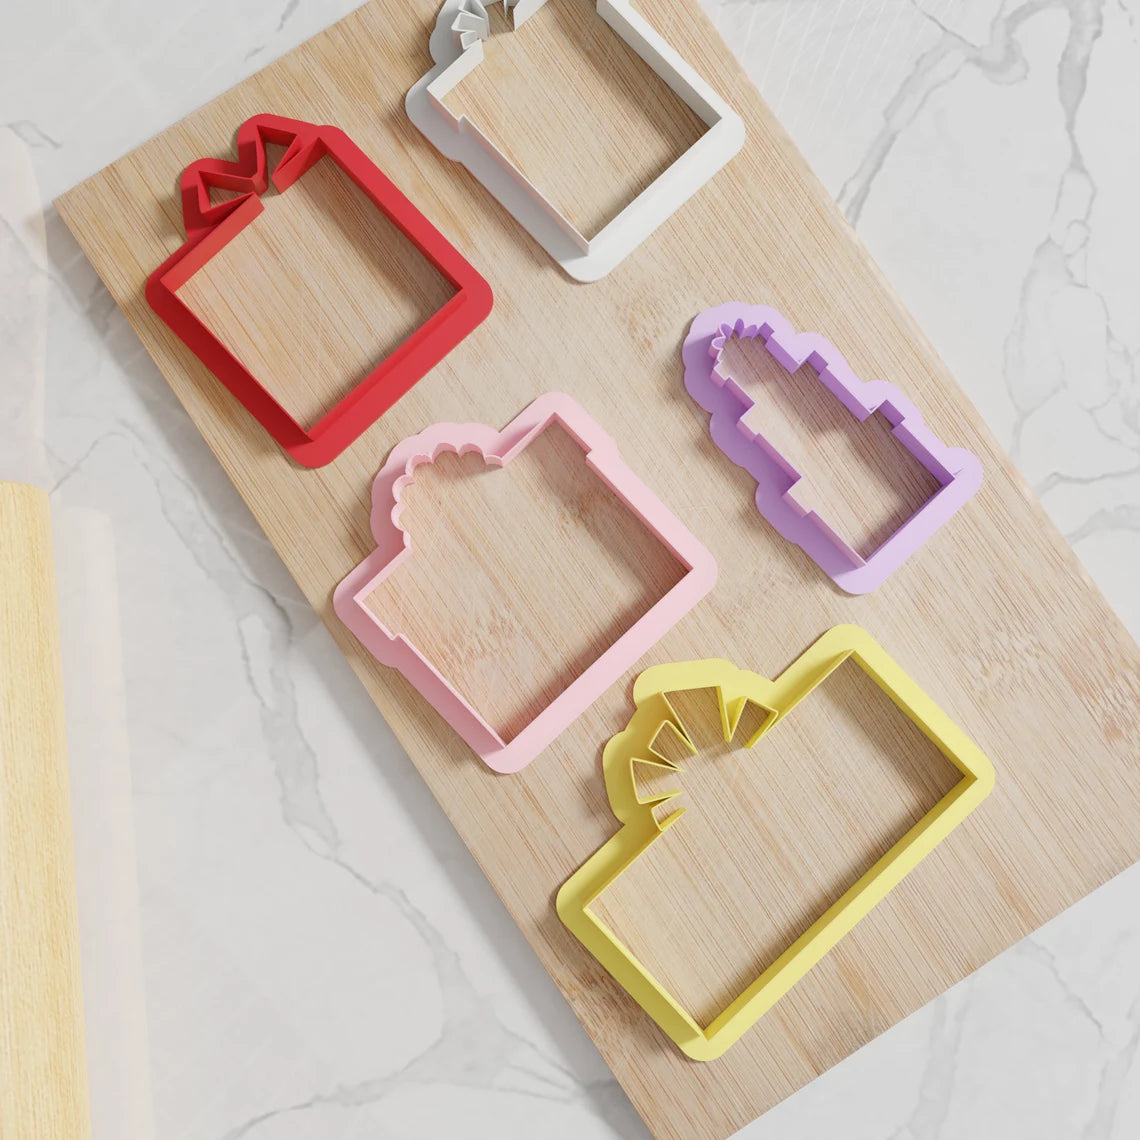 Funky Modern Christmas Present Cookie Cutters. 5 Modern Christmas Present Cookie Cutters From 3 Inch to 8 Inch Height